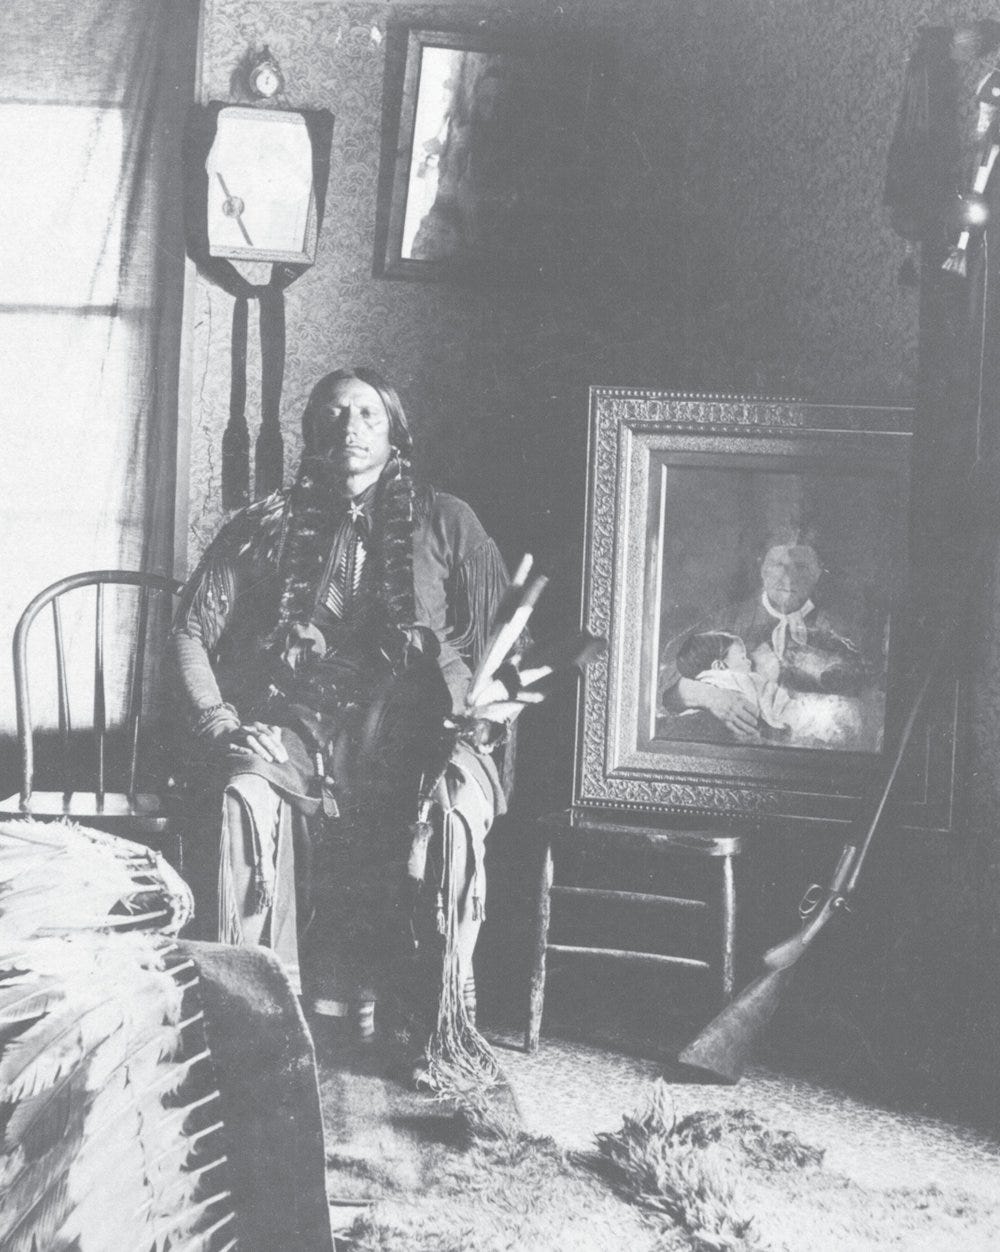 Quanah in his bedroom at Star House, ca. 1897. Next to him is a framed portrait of his mother, Cynthia Ann, and sister, Prairie Flower—his most cherished possession.